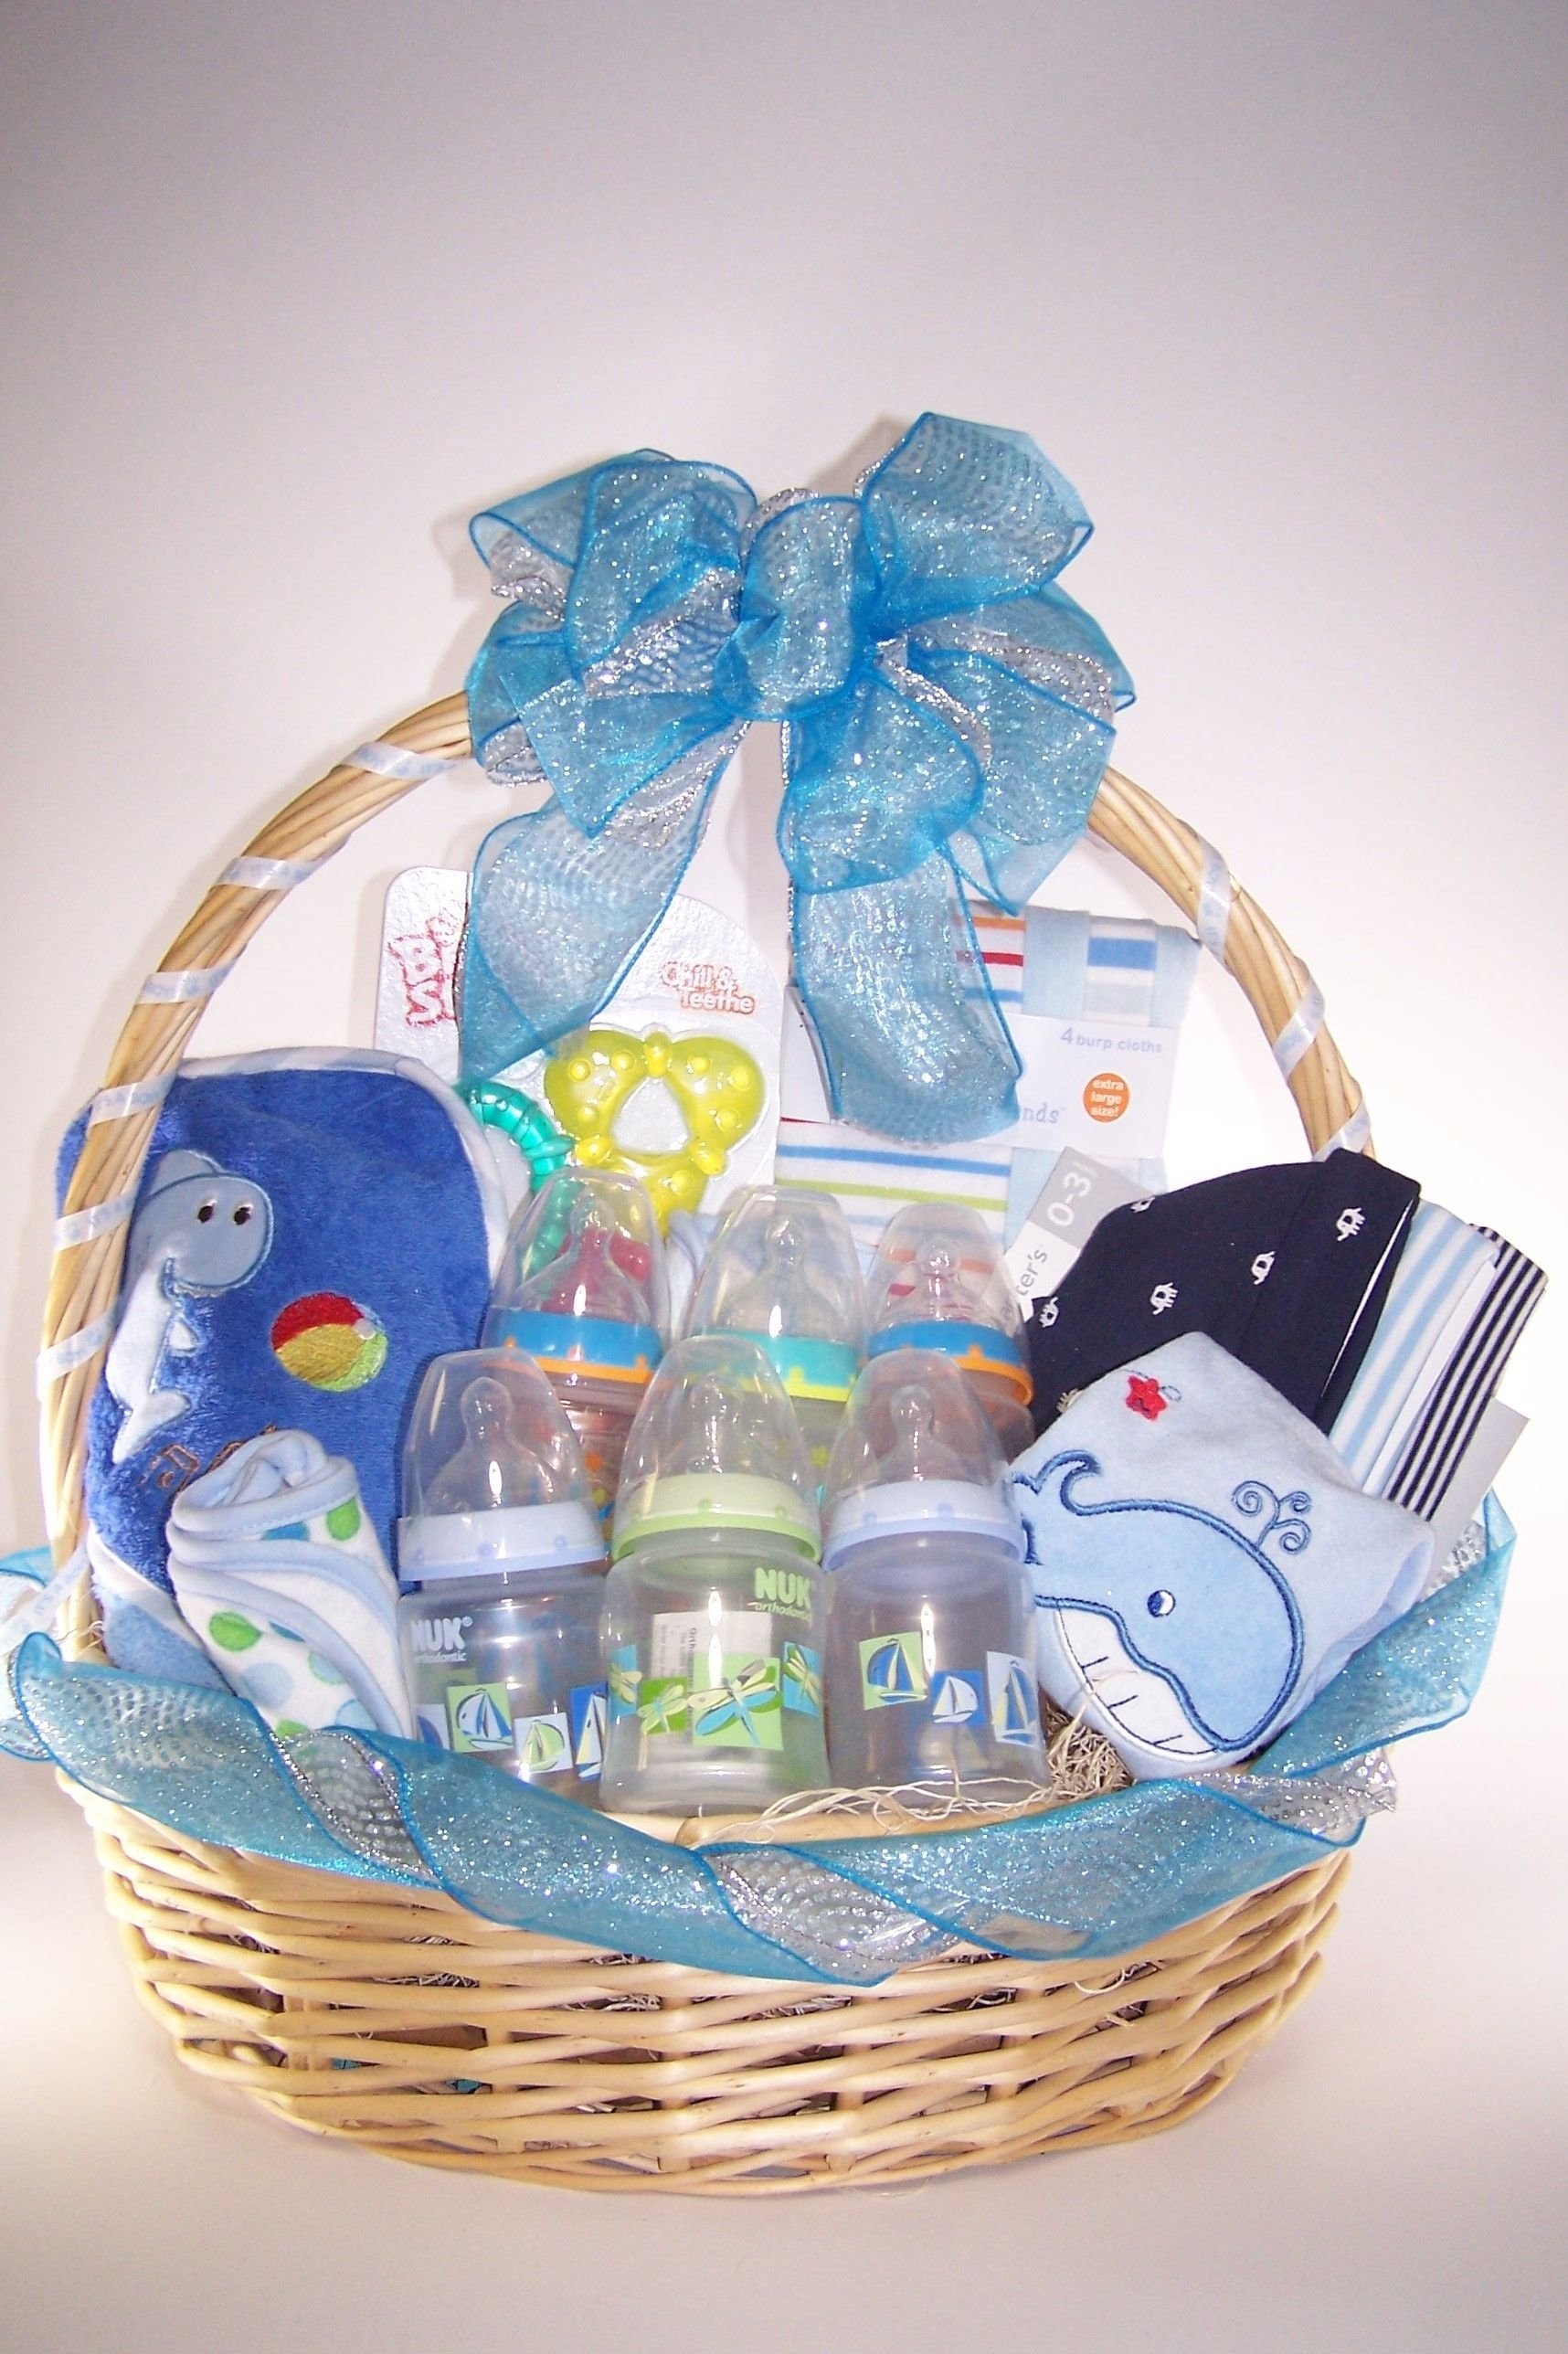 10 Most Recommended Newborn Baby Boy Gift Ideas baby shower its a boy gift basket gift baskets pinterest 2022